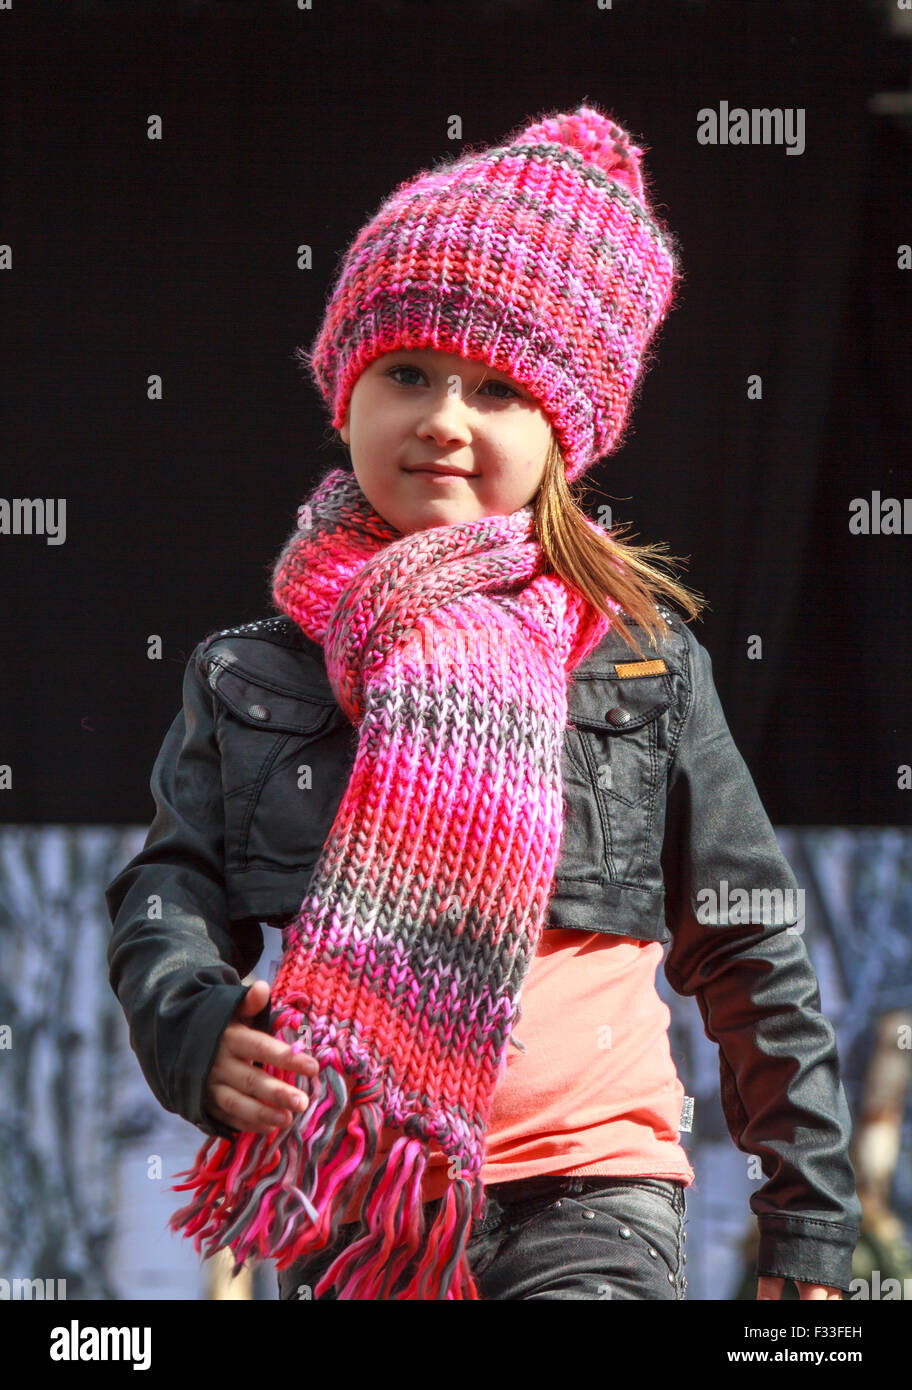 Dordrecht, Netherlands. 27th September, 2015. Free fashion show in the main square organized by the municipality. Child model dressed in pink on the catwalk showcasing the new autumn collection. Credit:  Tony Taylor/Alamy Live News Stock Photo